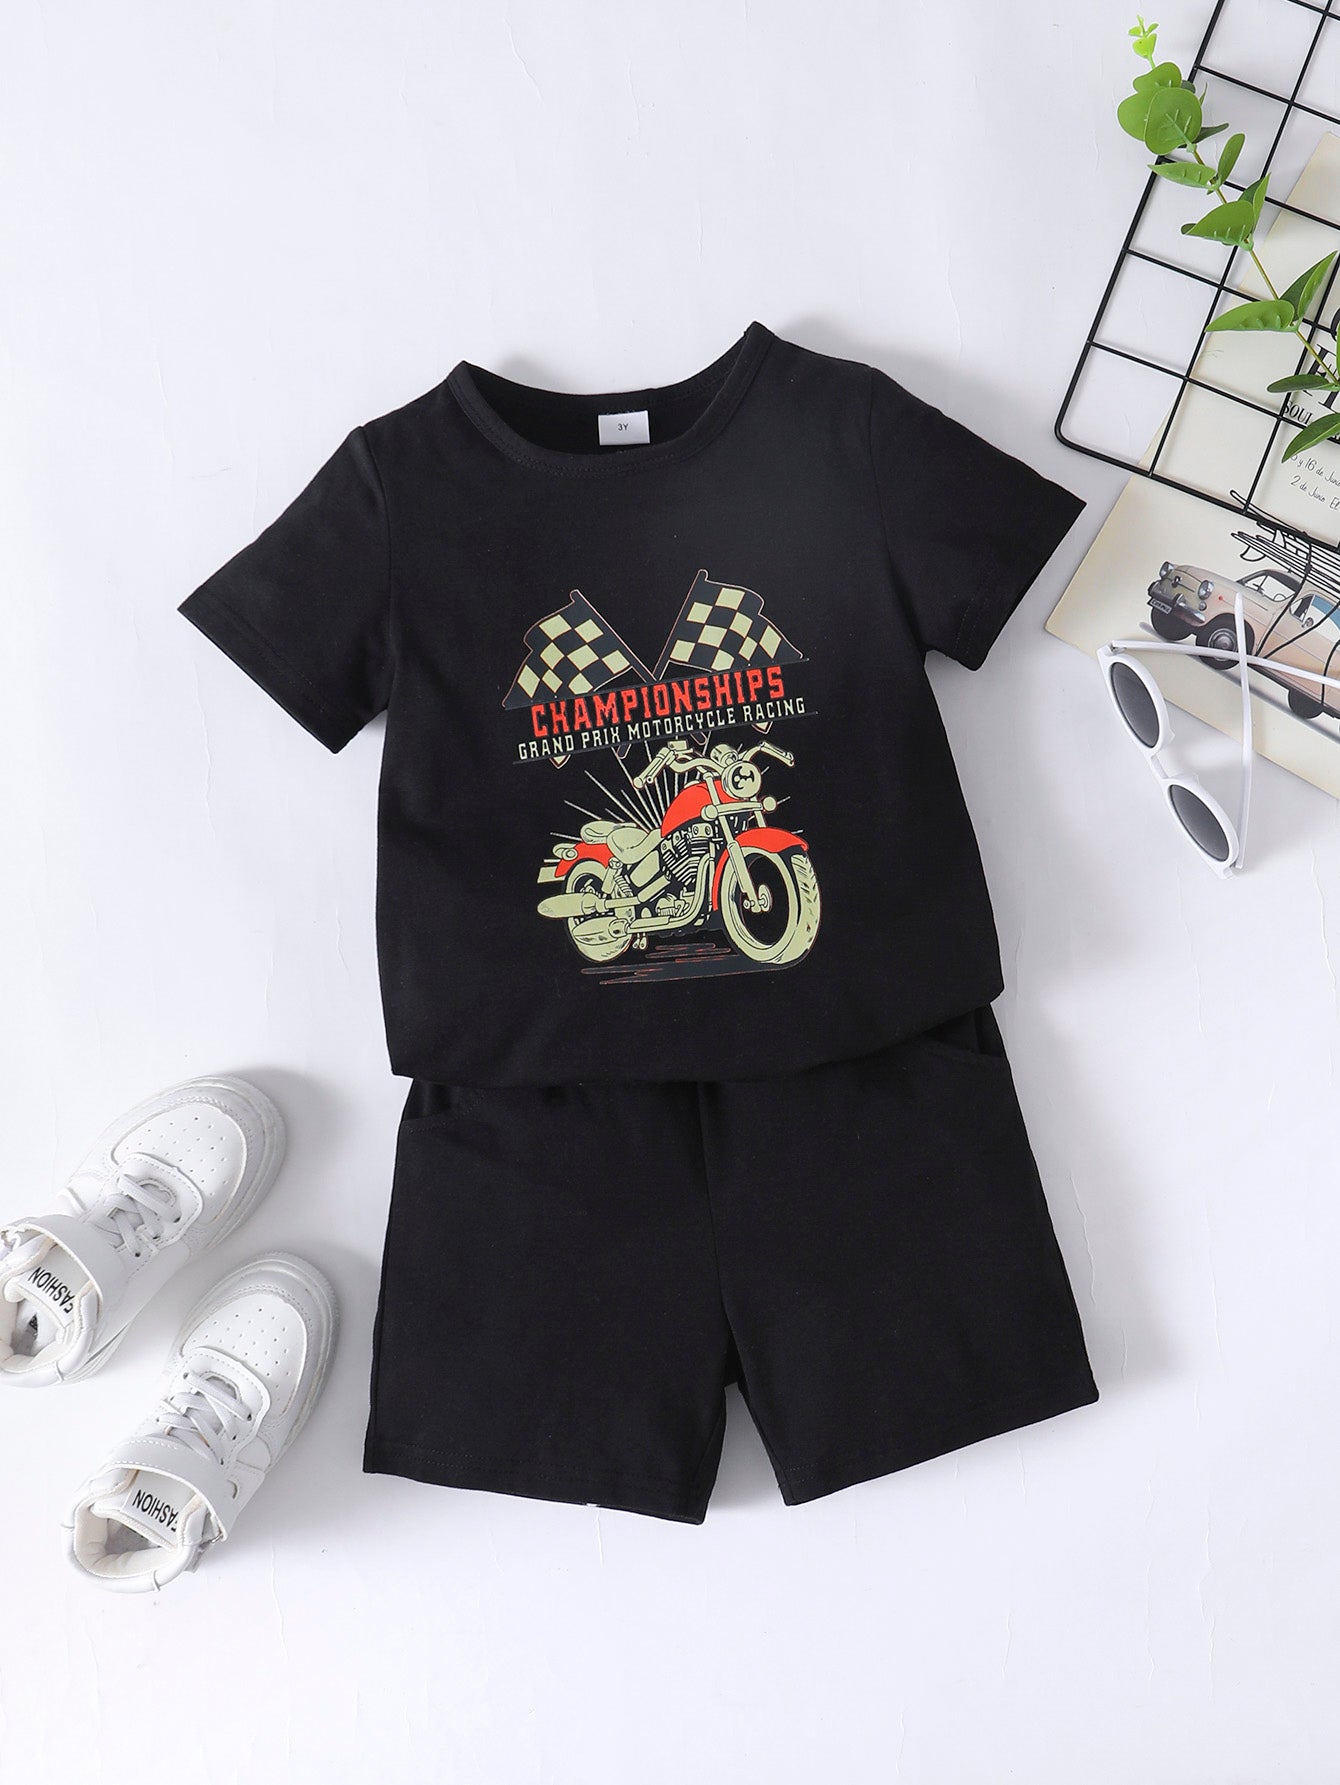 Boys CHAMPIONSHIPS Graphic Tee and Shorts Set - DromedarShop.com Online Boutique